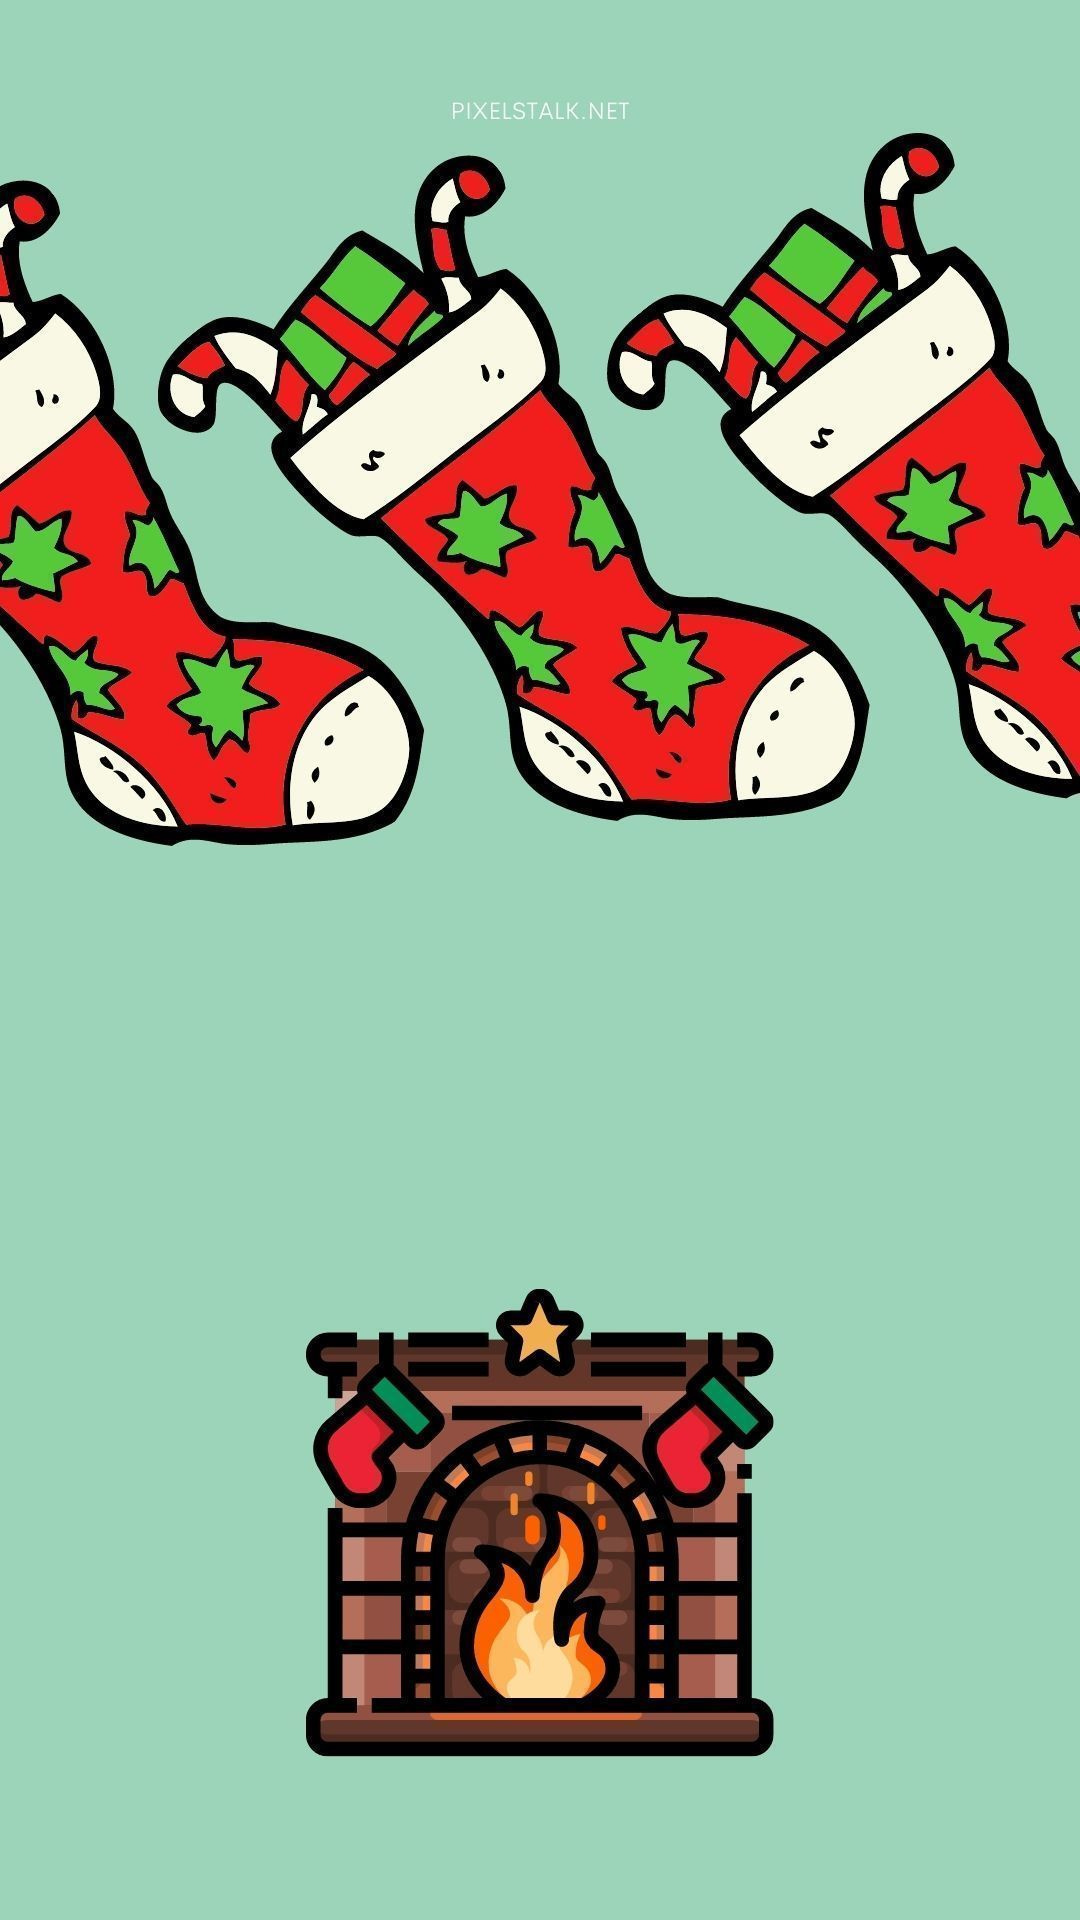 A christmas themed image with three stockings hanging over the fireplace - Christmas iPhone, cute Christmas